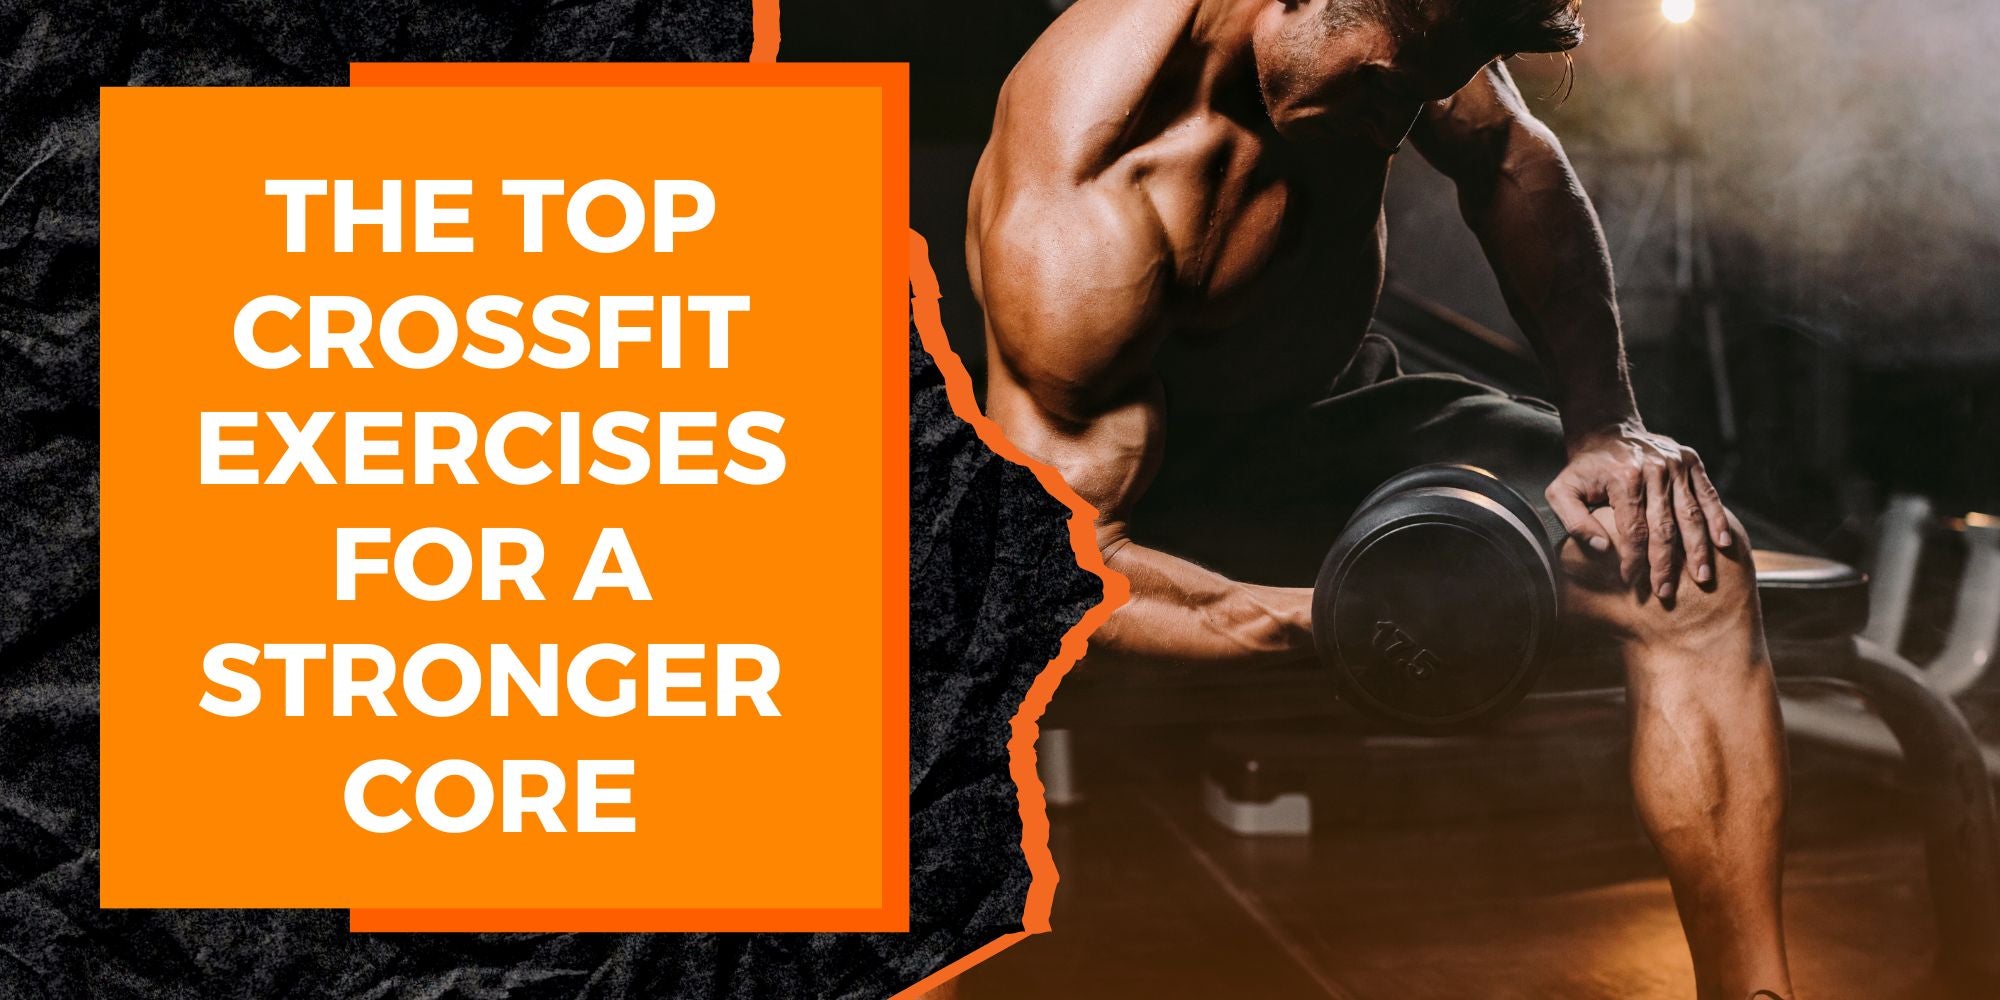 The Top CrossFit Exercises for a Stronger Core